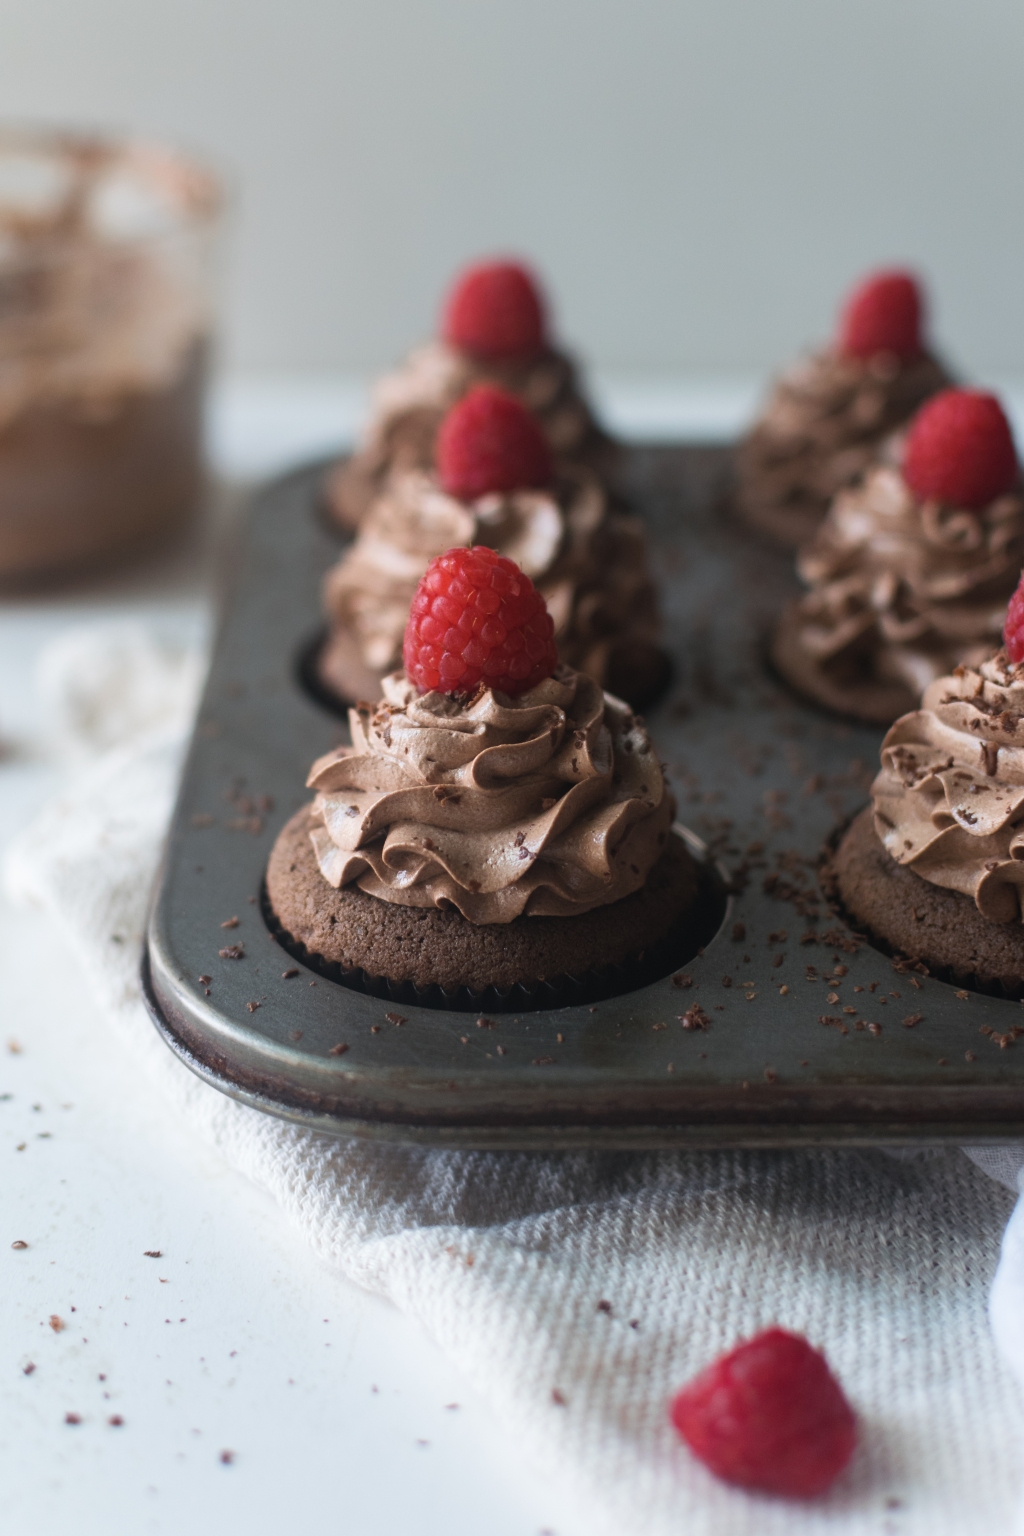 Double Chocolate Cupcakes with Raspberries